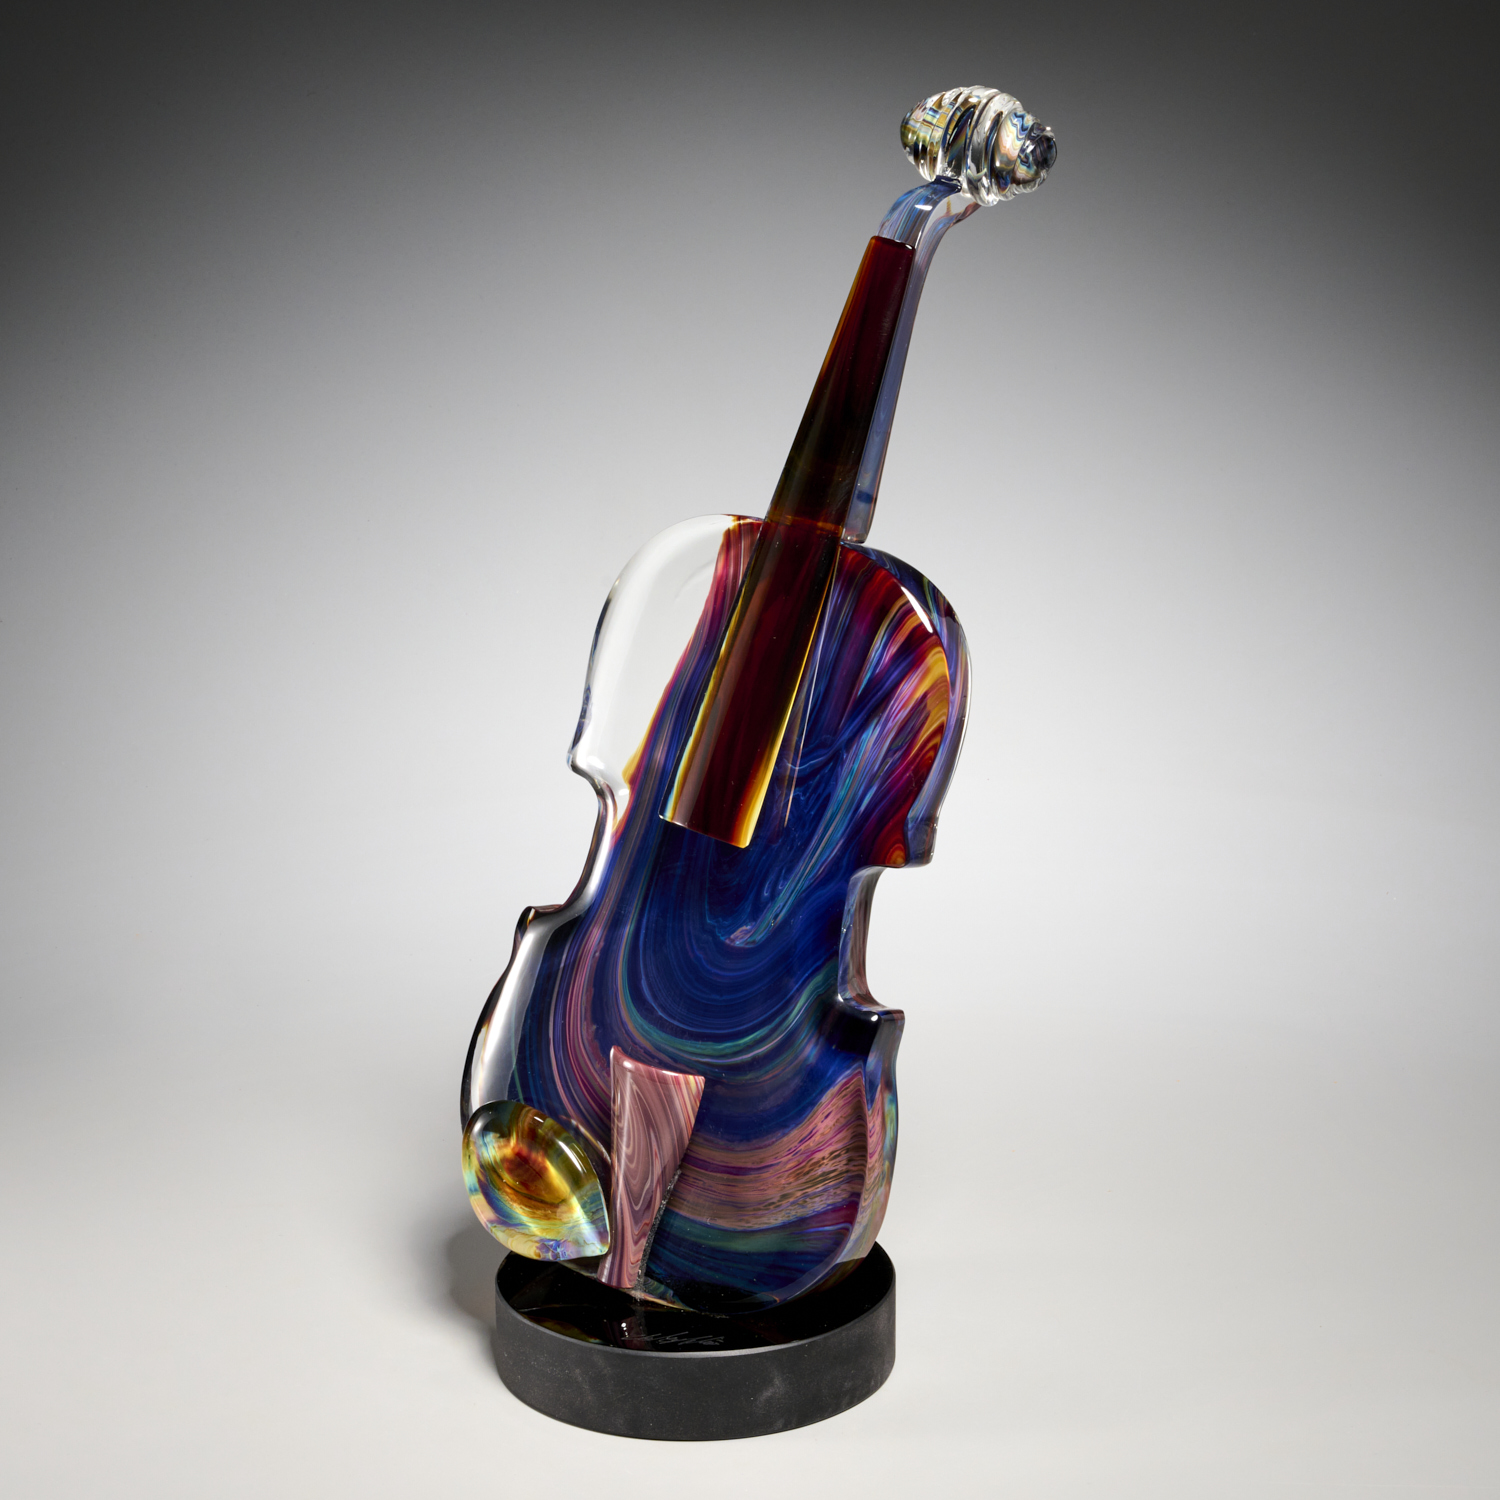 DINO ROSIN AFTER MURANO GLASS 3b451d